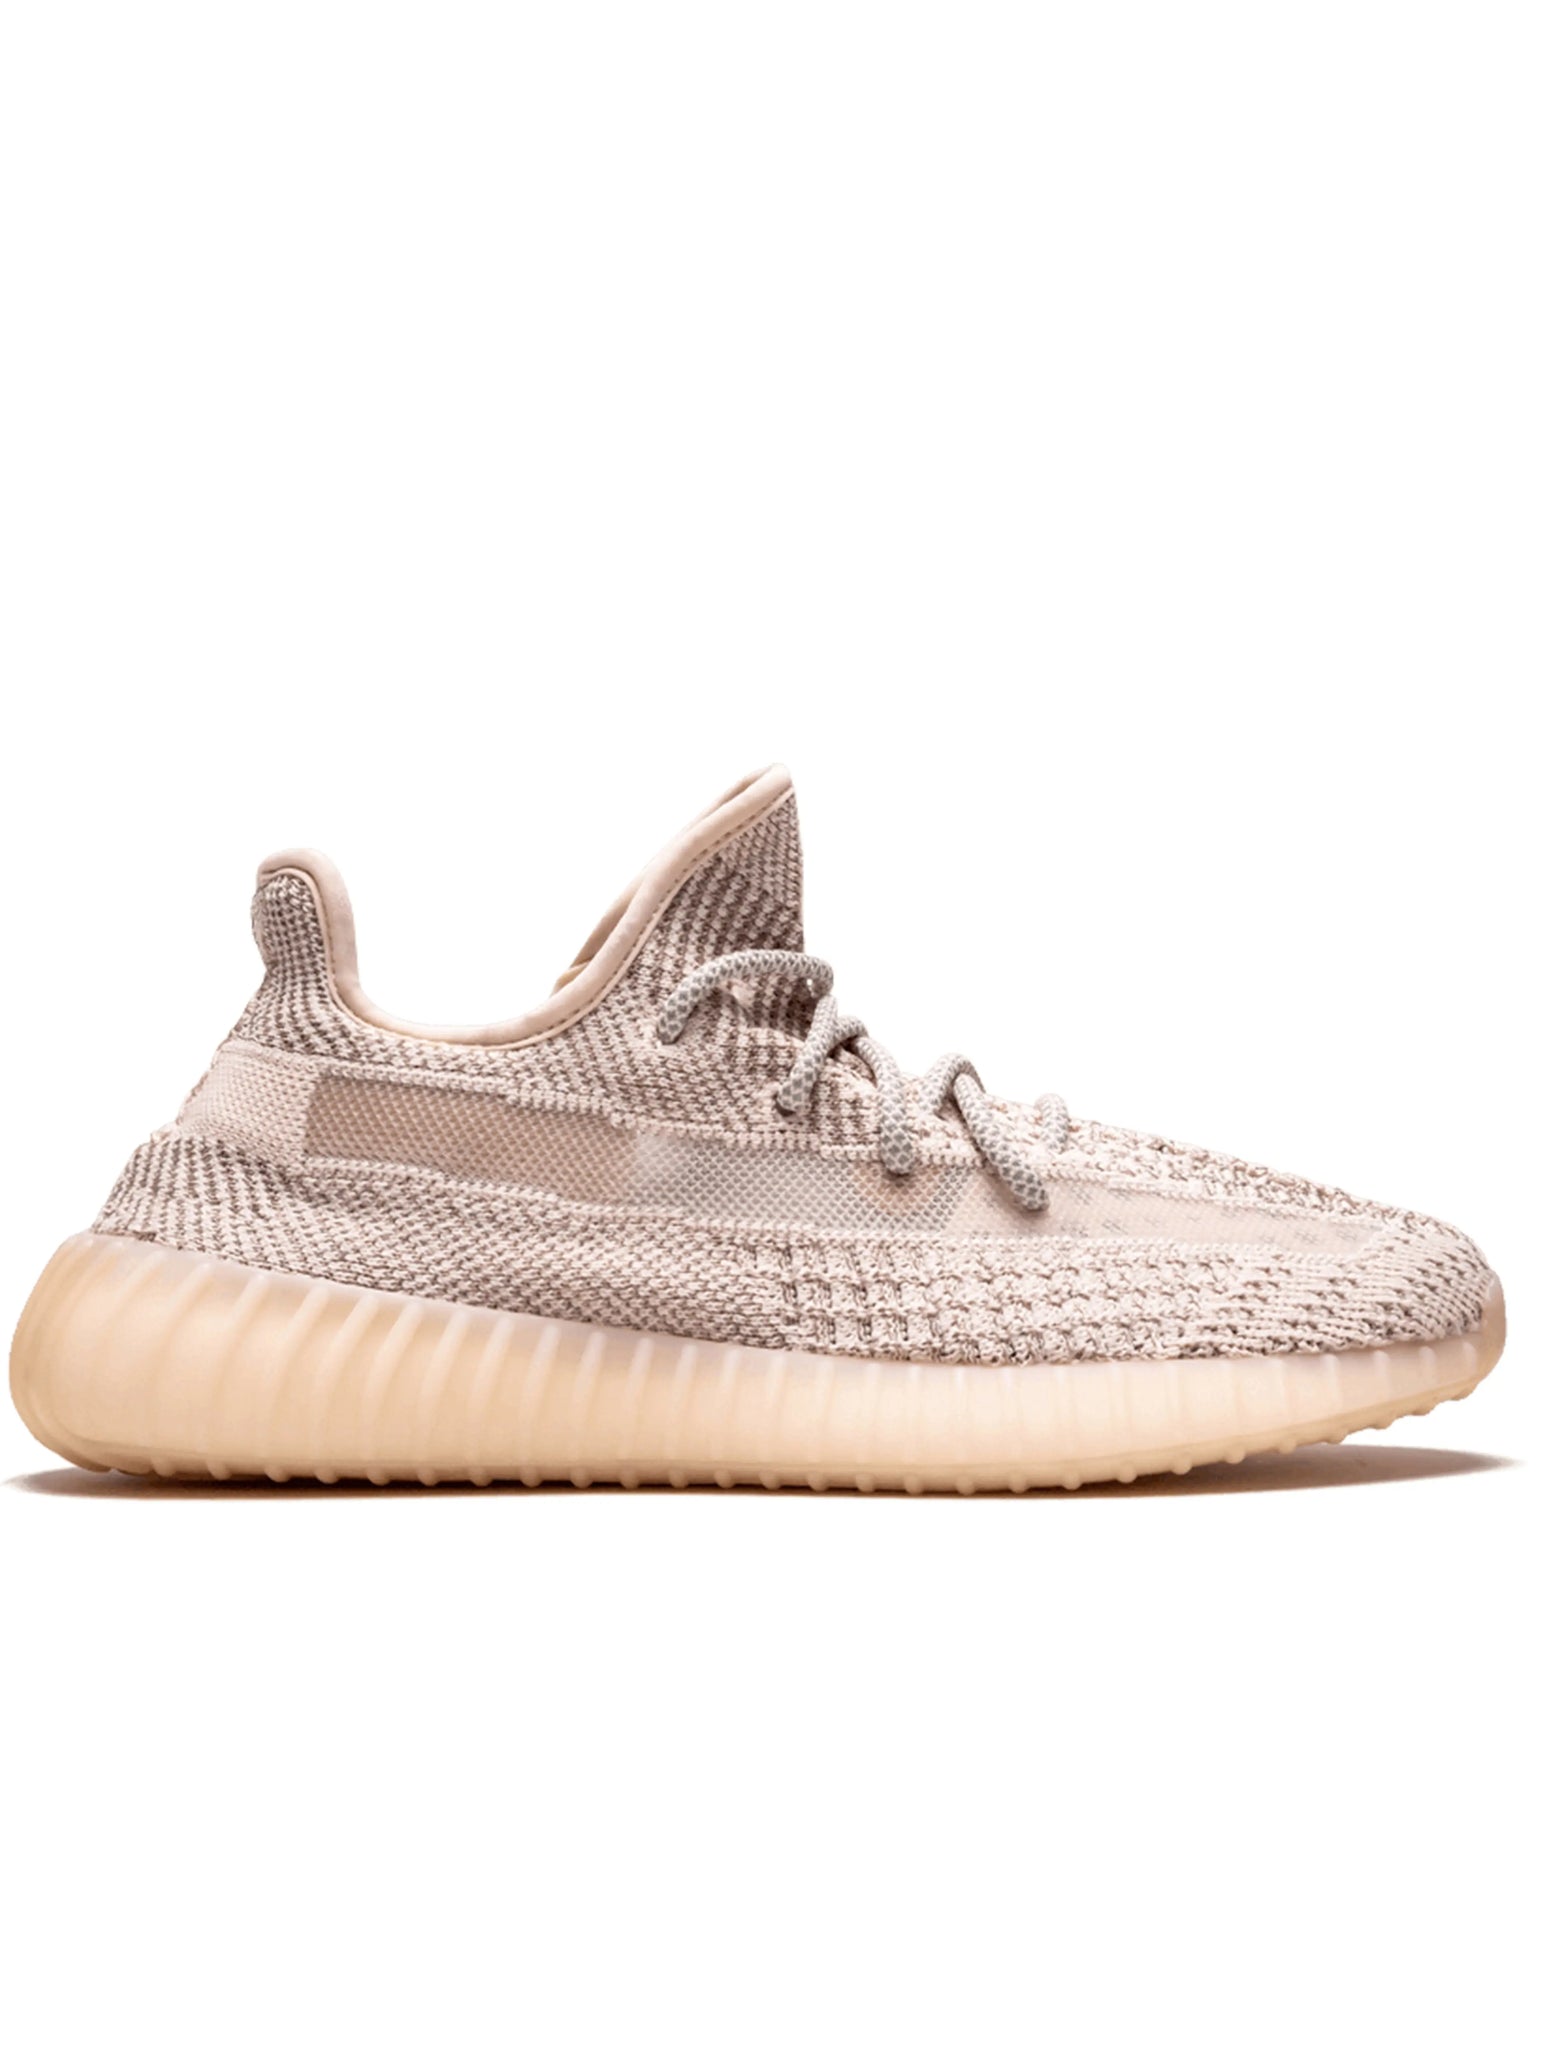 Adidas Yeezy Boost 350 V2 Synth (Non-Reflective) Prior